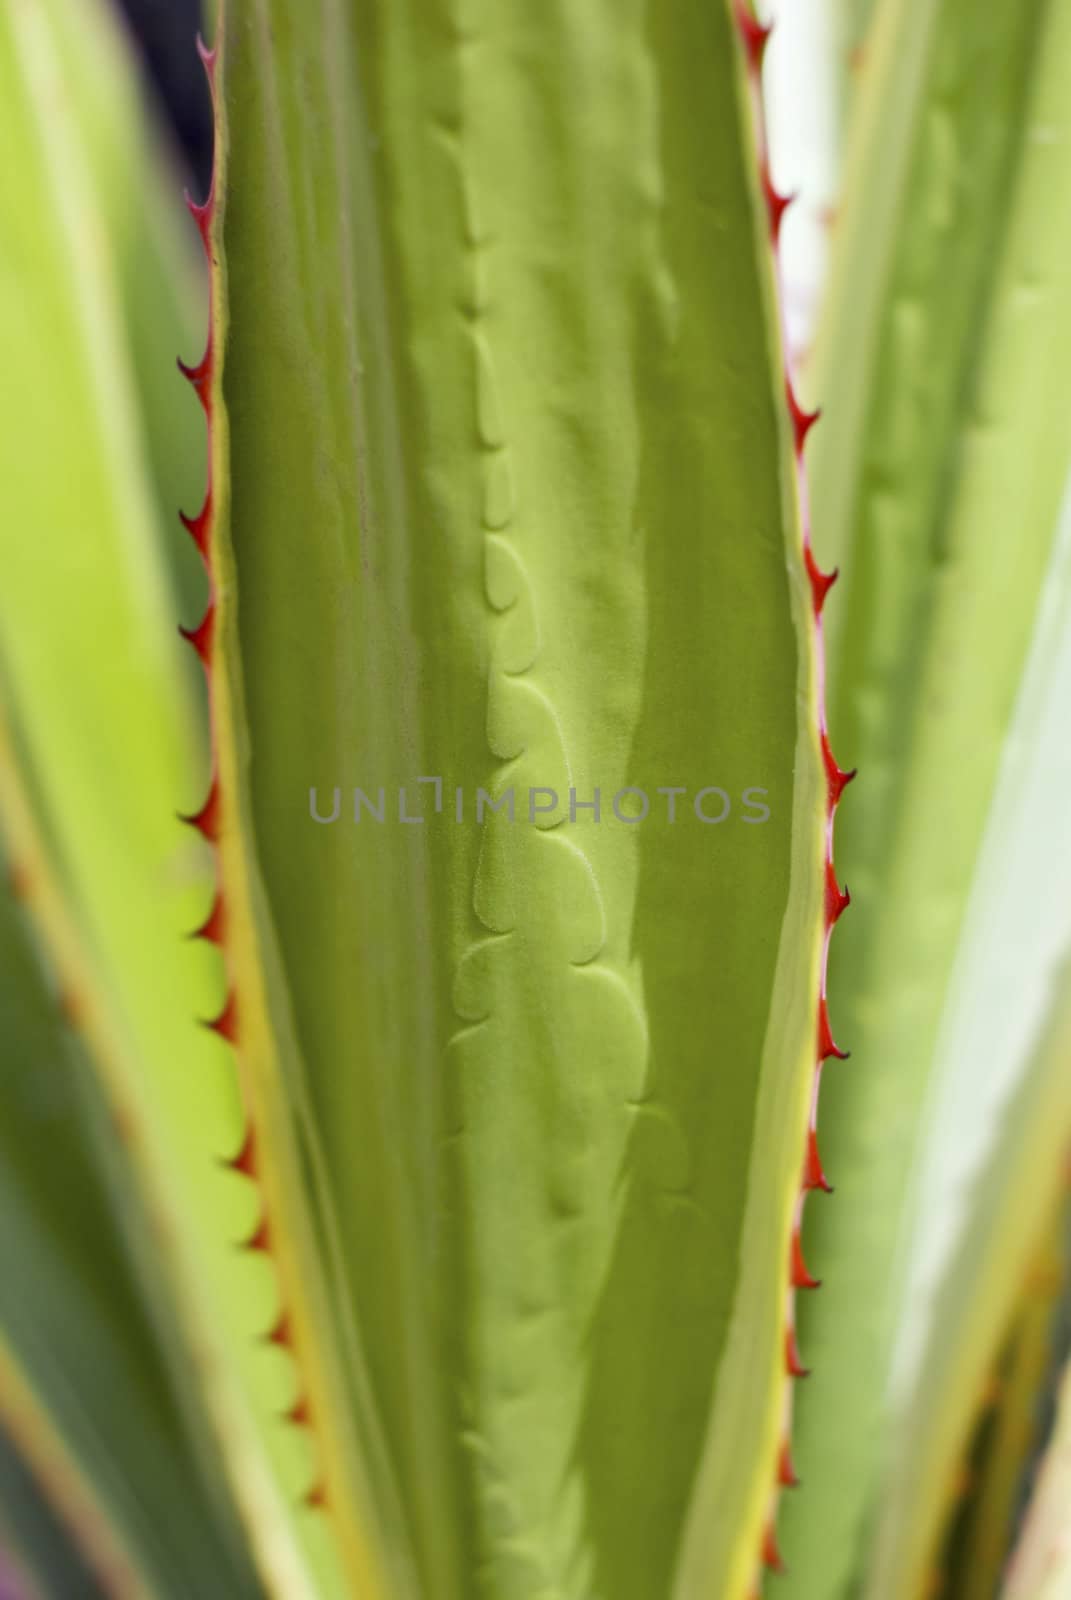 Detail of long leaf cactus plant with red thorns  (cactus phylum, aloe vera family)